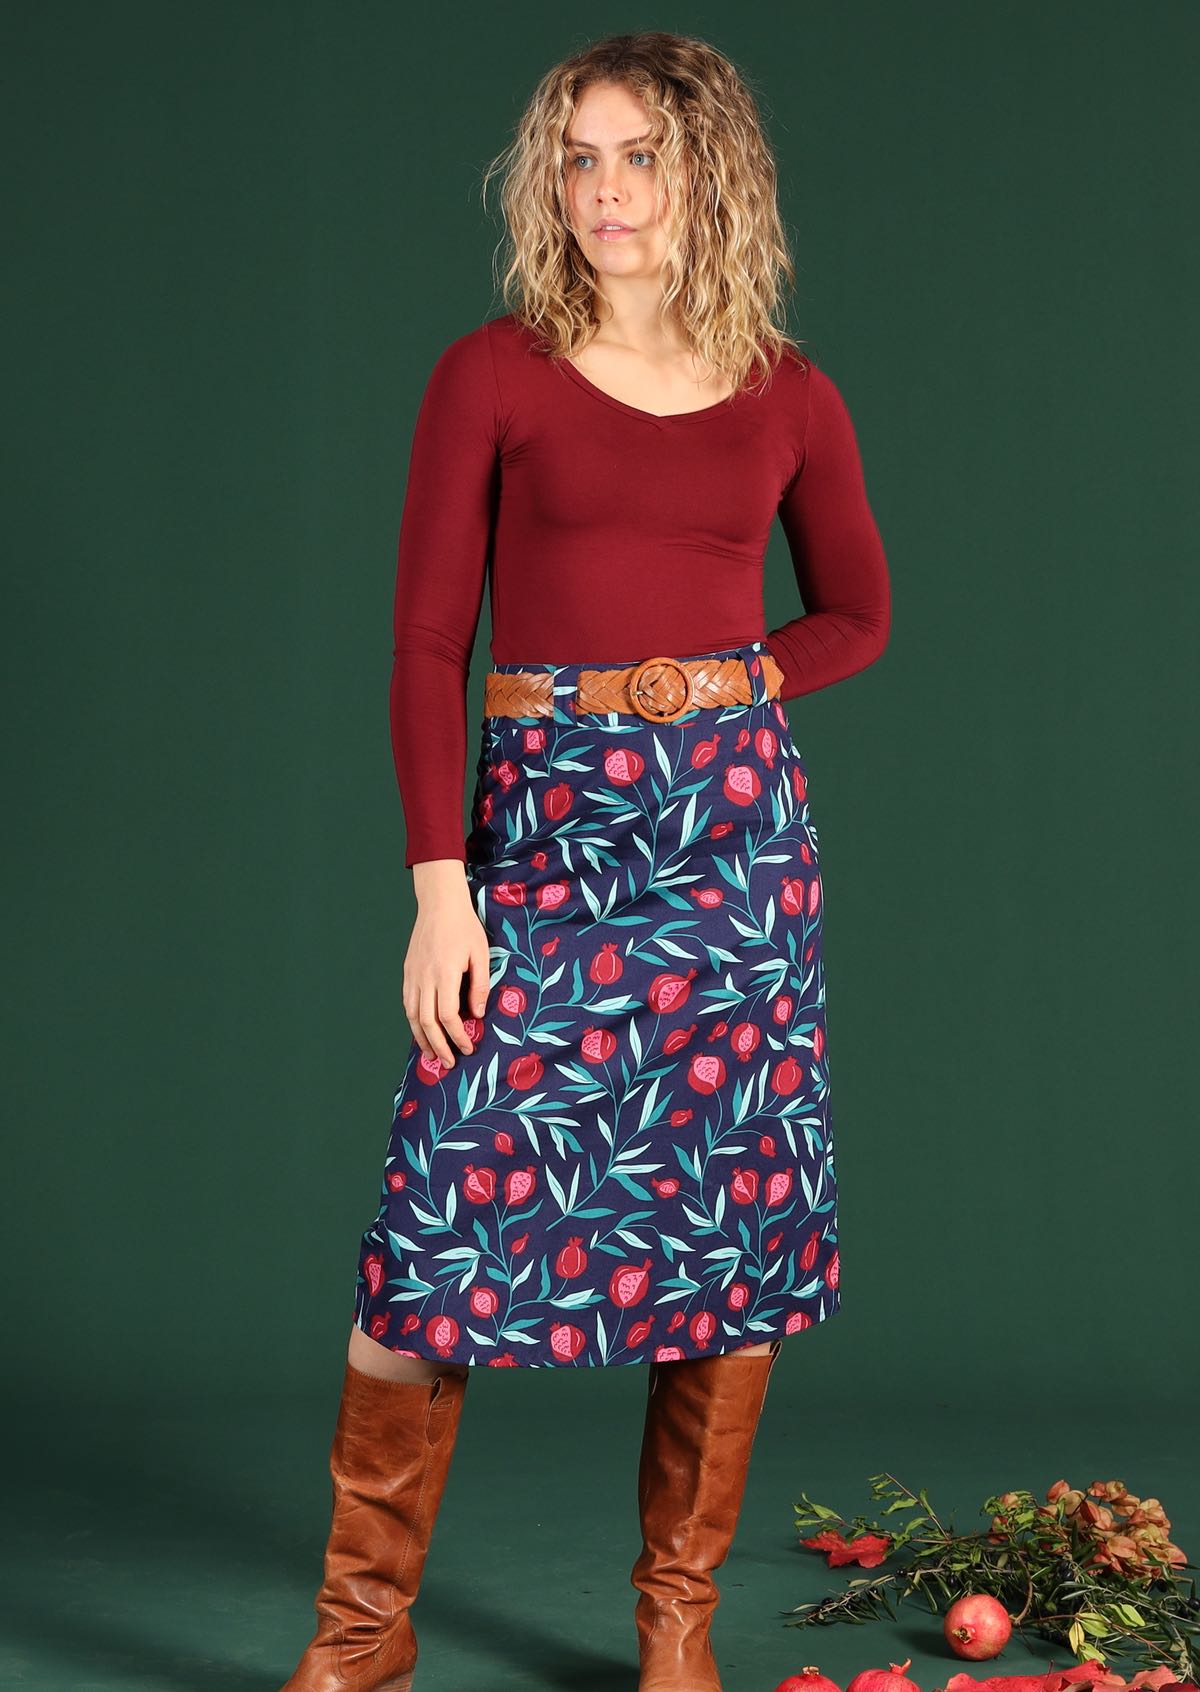 Women wears 100% cotton skirt with pomegranate print